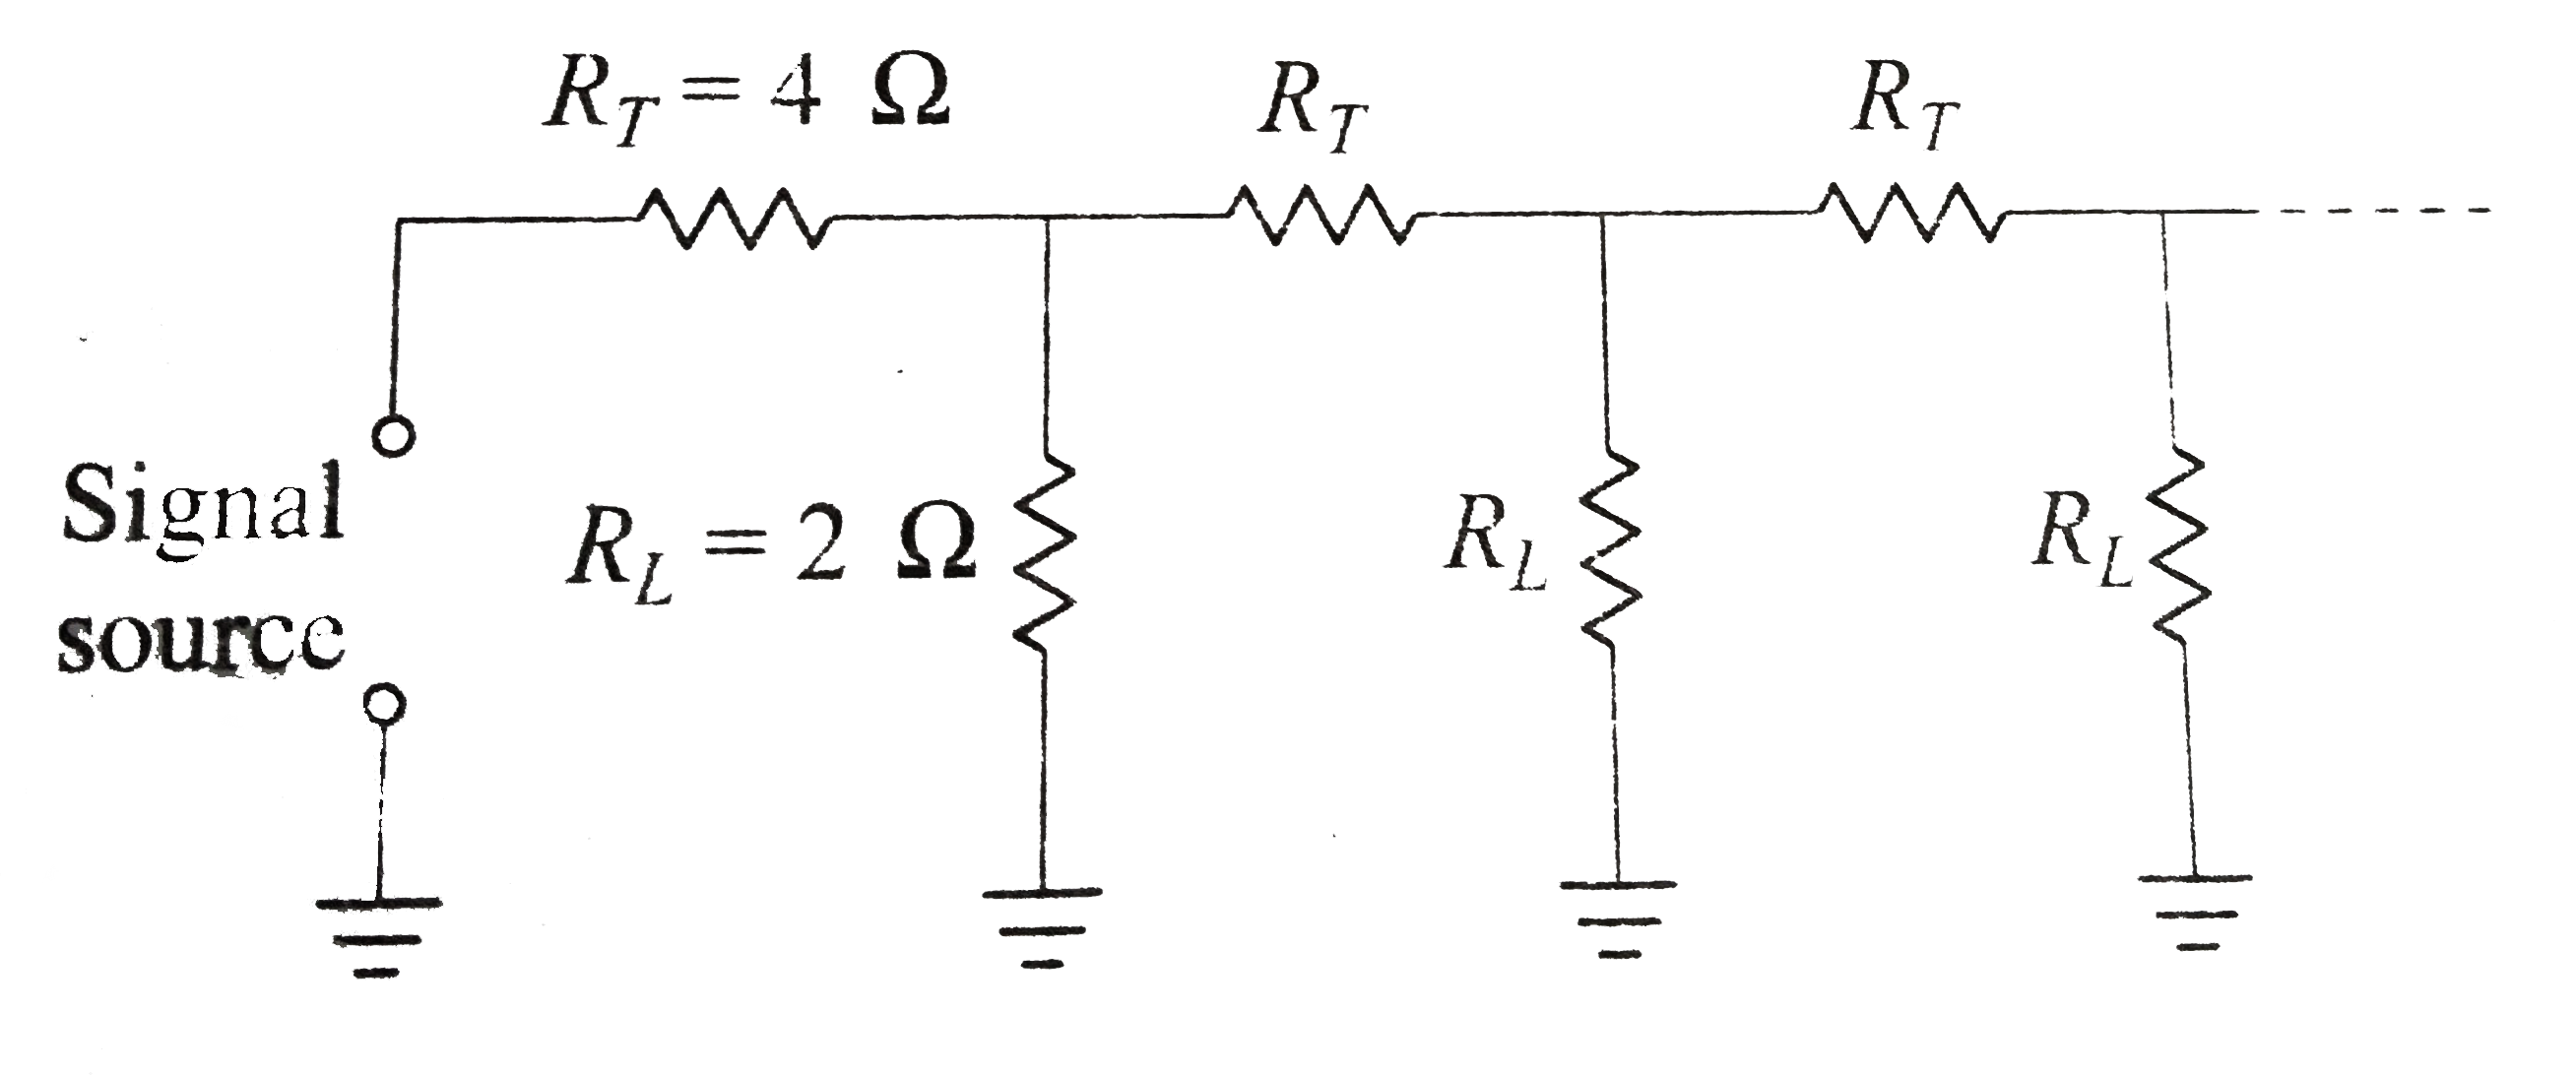 Figure shows a circuit model for the transmission of an electrical signal, such as cable TV, to a large number of subscribers. Each subscriber connects a load resistance RL between the transmission line and the ground. Assume the ground to be at zero potential and to have negligible resistance. The resistance of the transmission line between the connection points of different subscribers is modeled as the constant resistance RT. The equivalent resistance across the signal source is